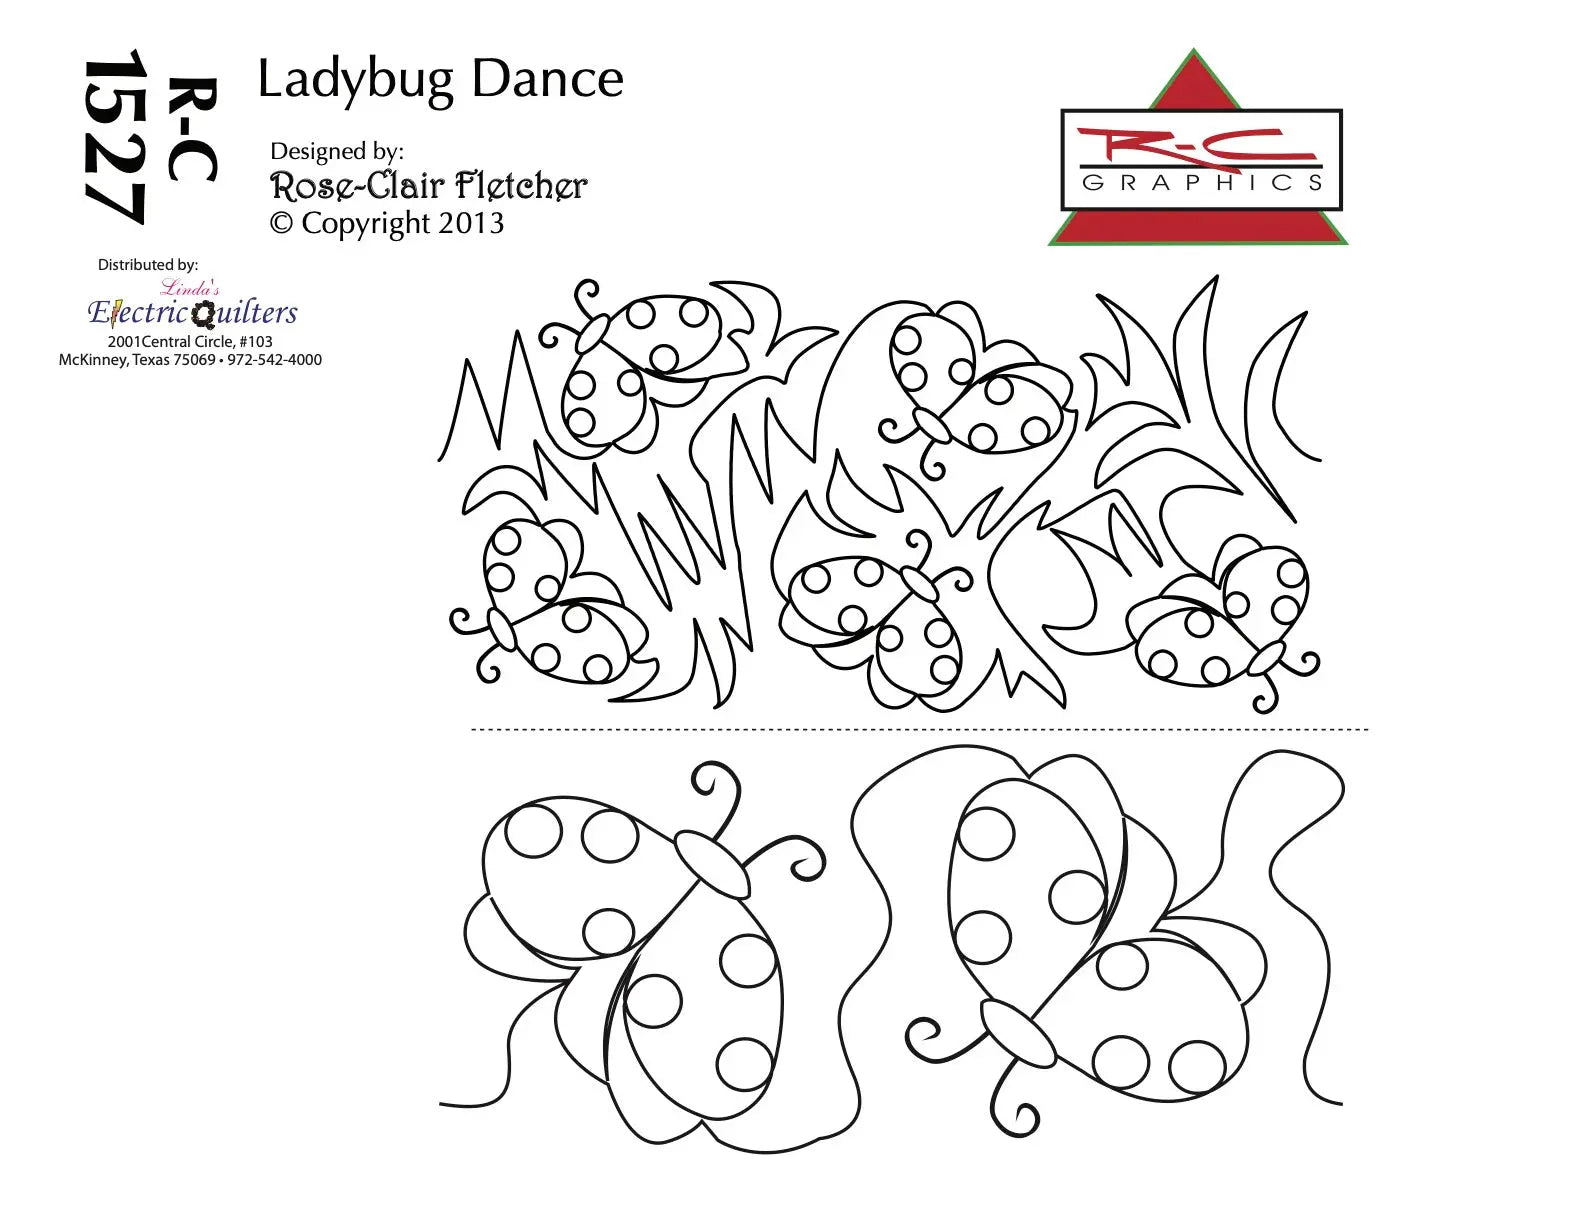 1527 Ladybug Dance Pantograph by Rose-Clair Fletcher - Linda's Electric Quilters